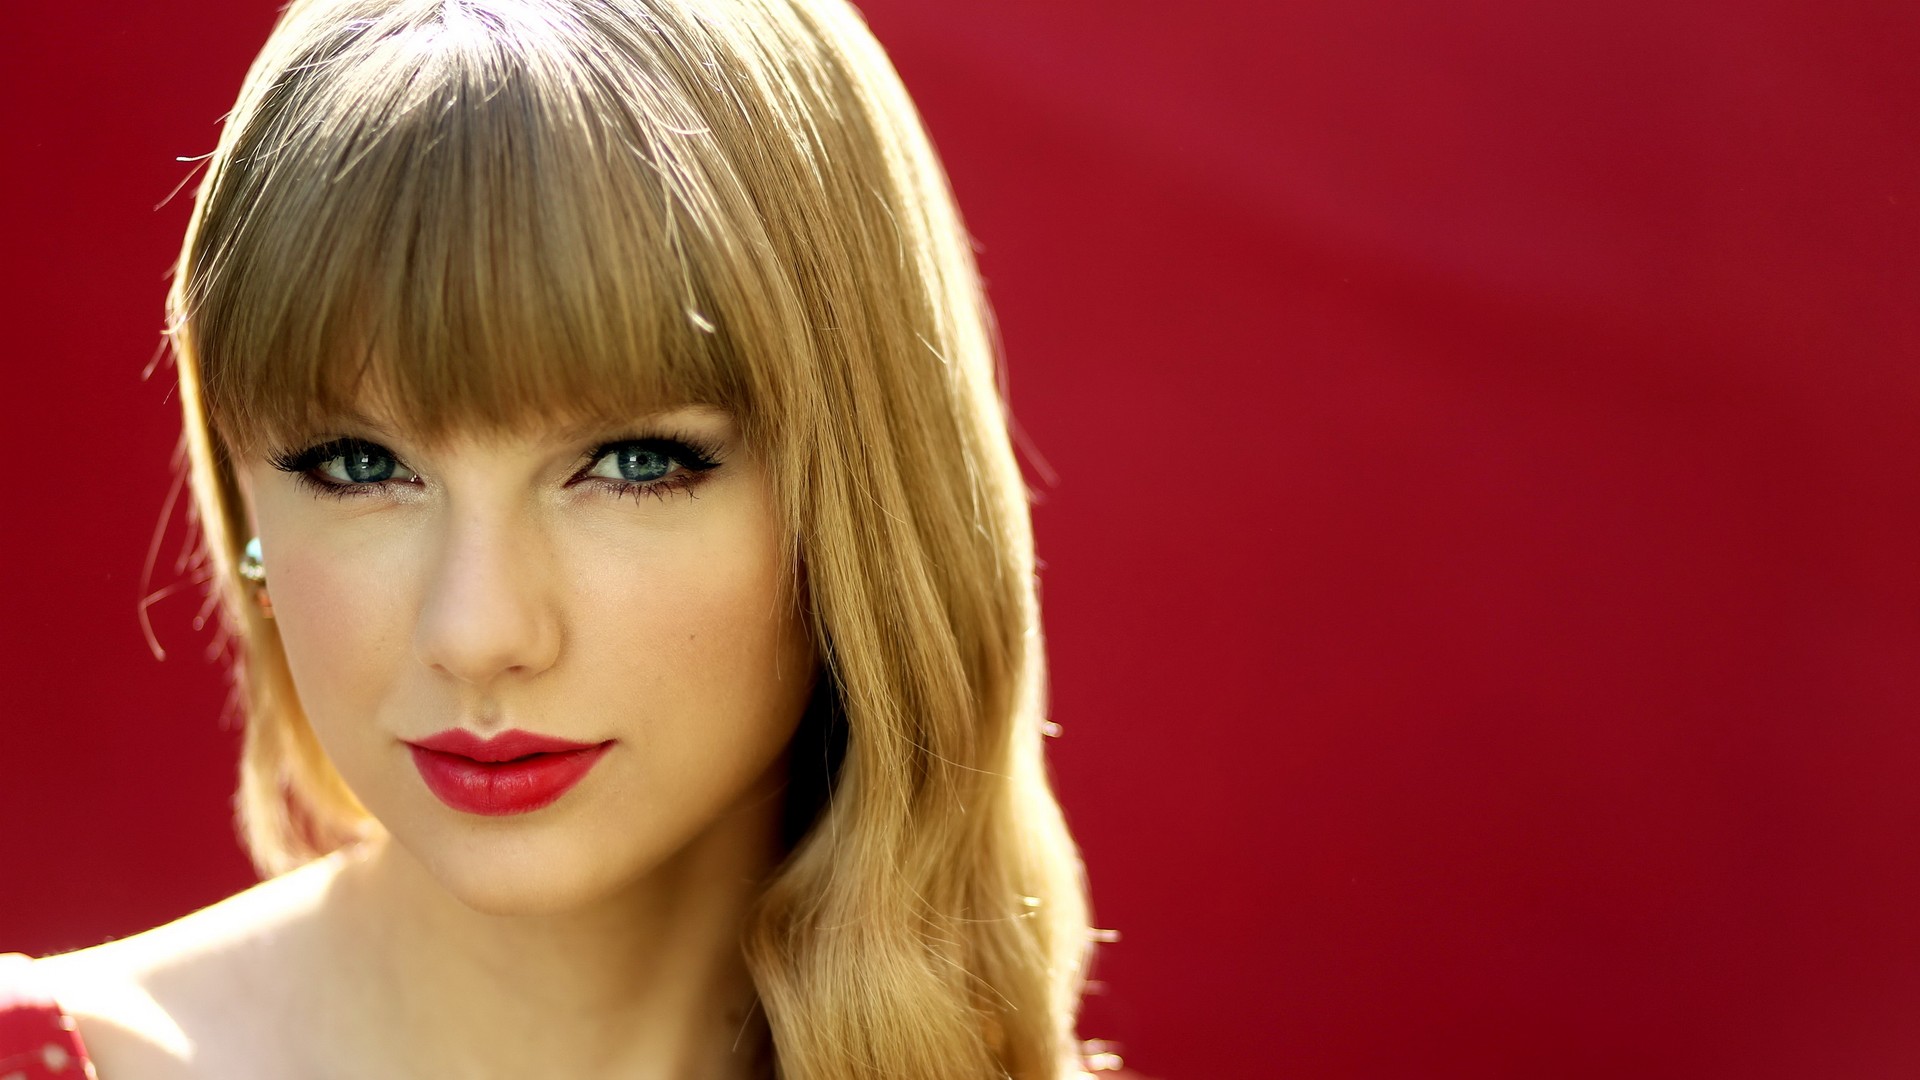 Taylor Swift Desktop Wallpaper Widescreen Pictures To Pin